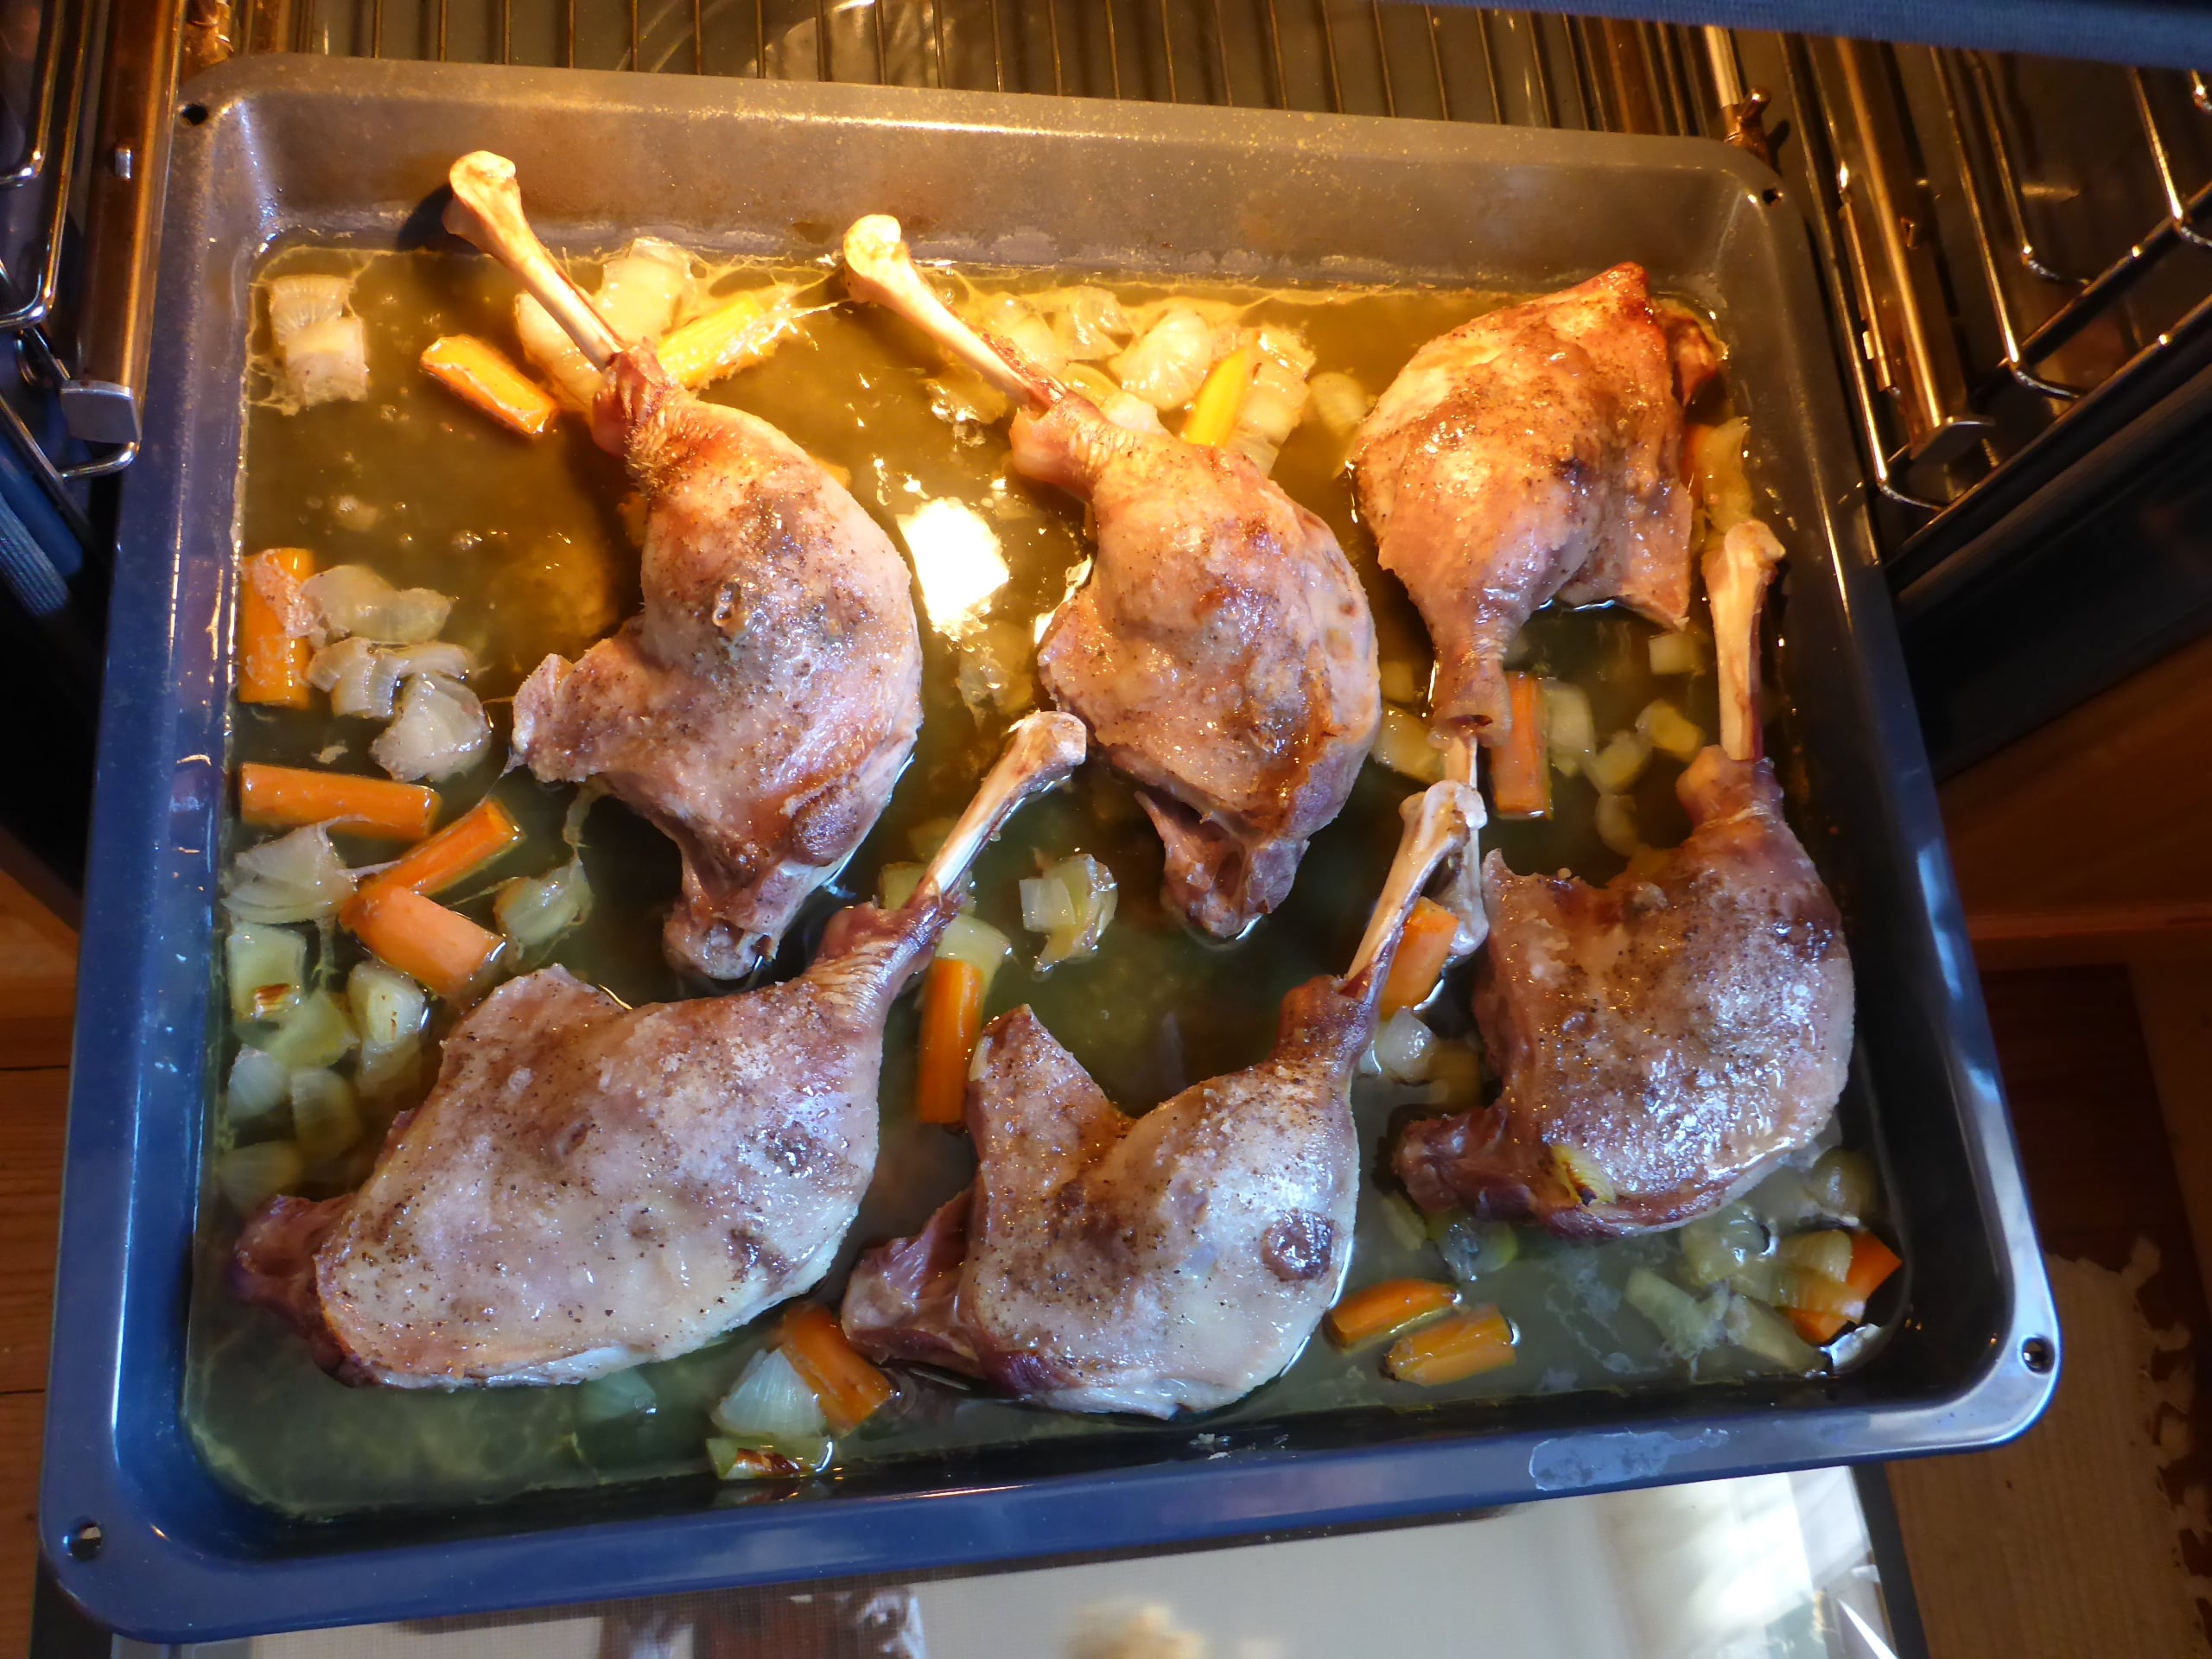 Goose legs and diced carrots and onions on a baking sheet inside the oven, midway through the roasting process.